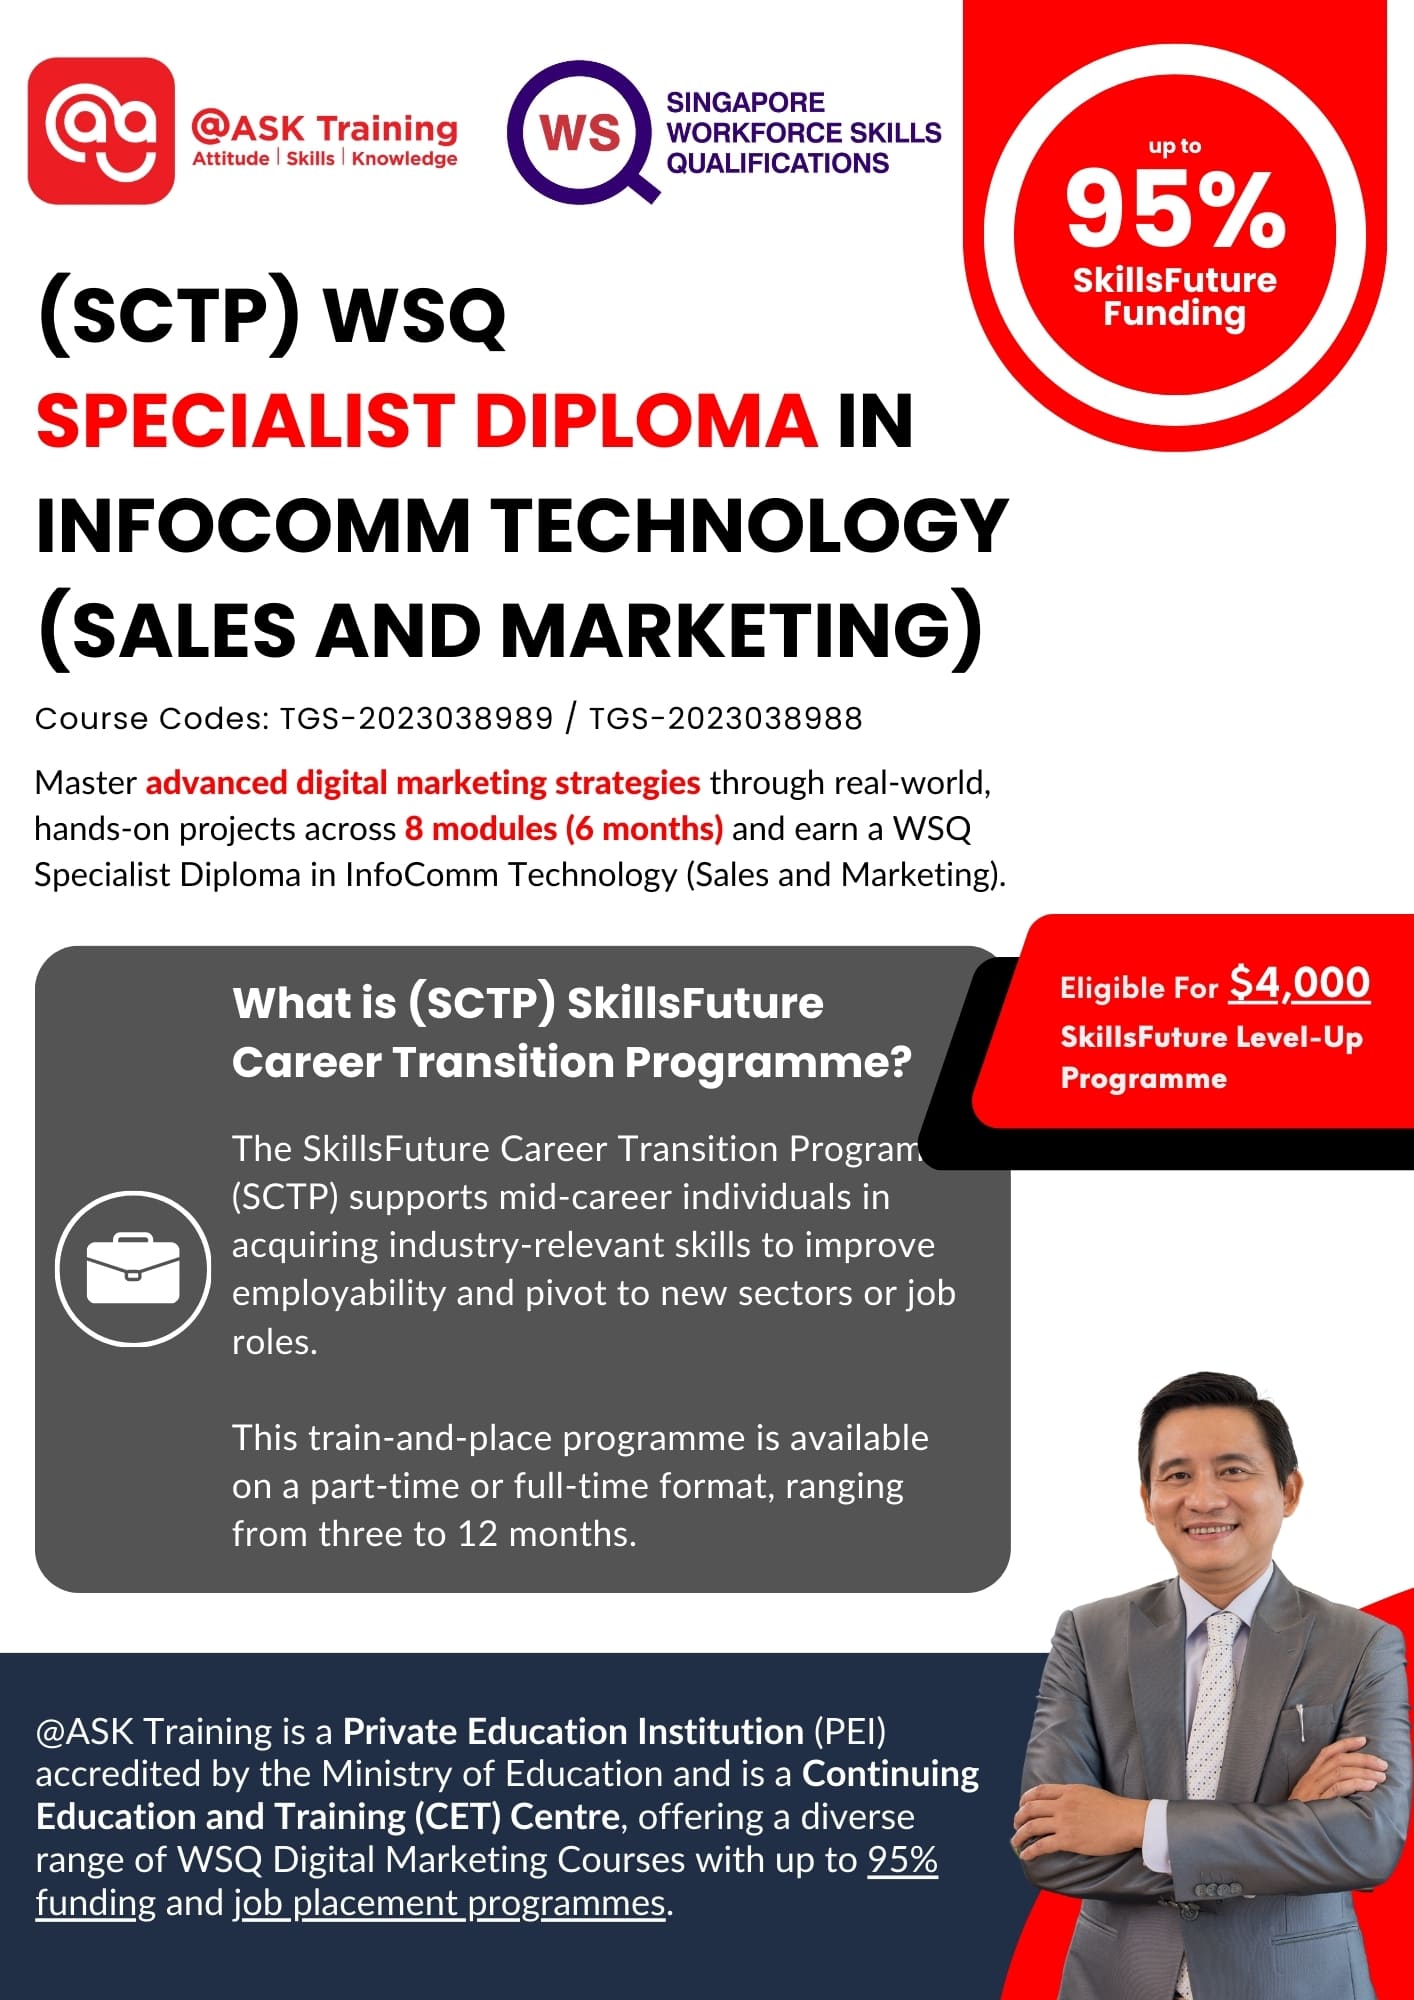 (SCTP) WSQ Specialist Diploma in Infocomm Technology (Sales and Marketing) Course Brochure Cover